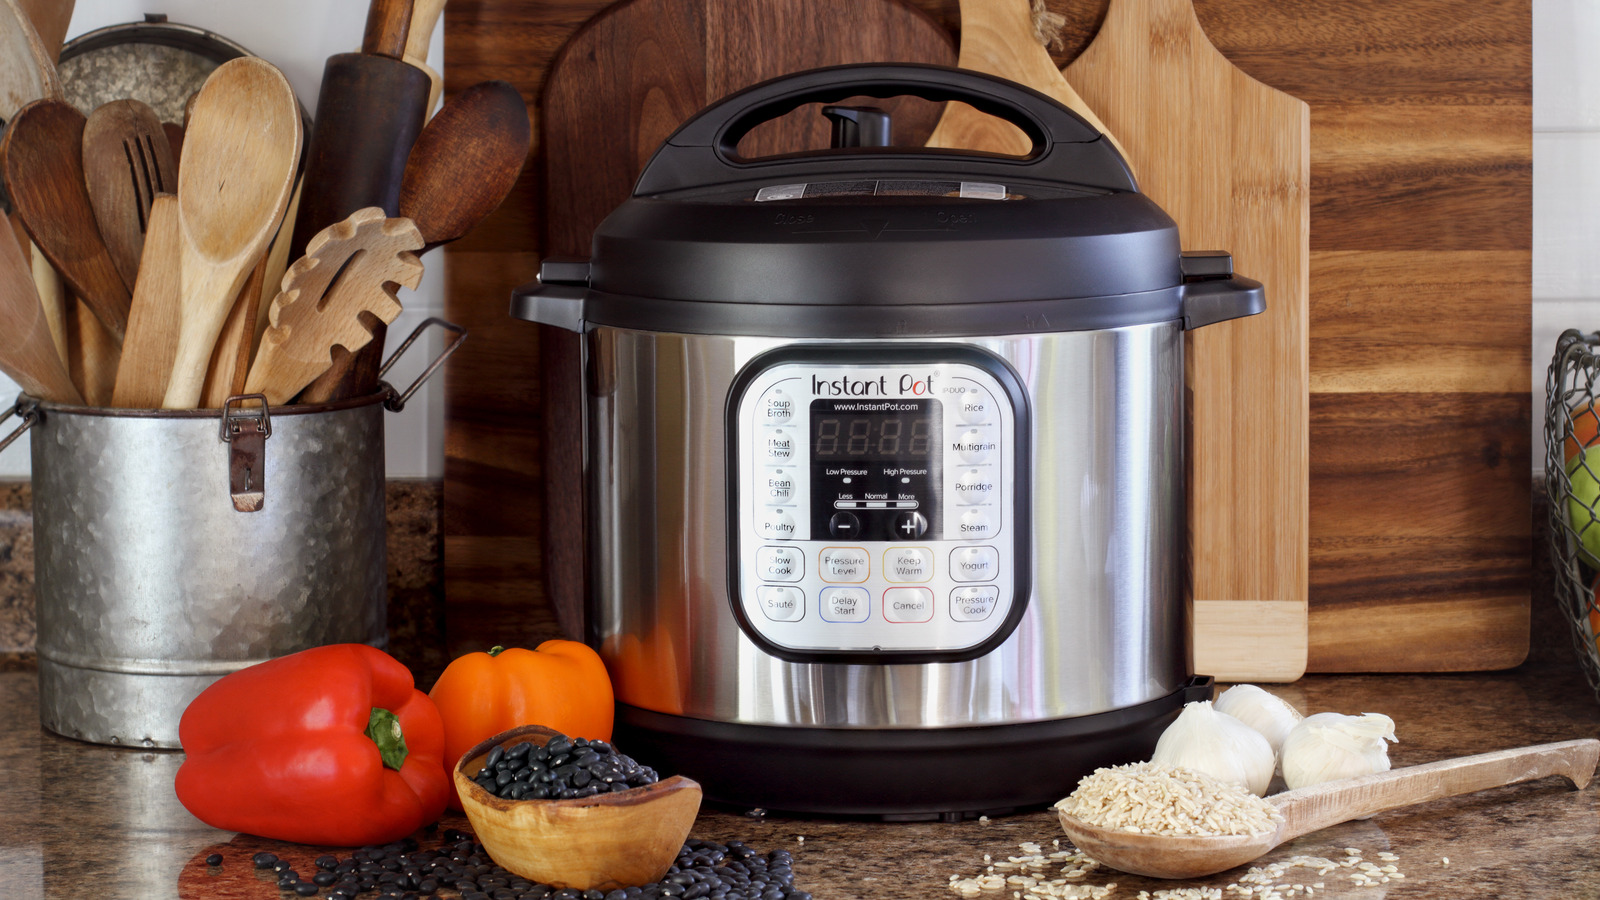 https://www.thedailymeal.com/img/gallery/12-things-you-should-never-cook-in-your-instant-pot/l-intro-1668009590.jpg